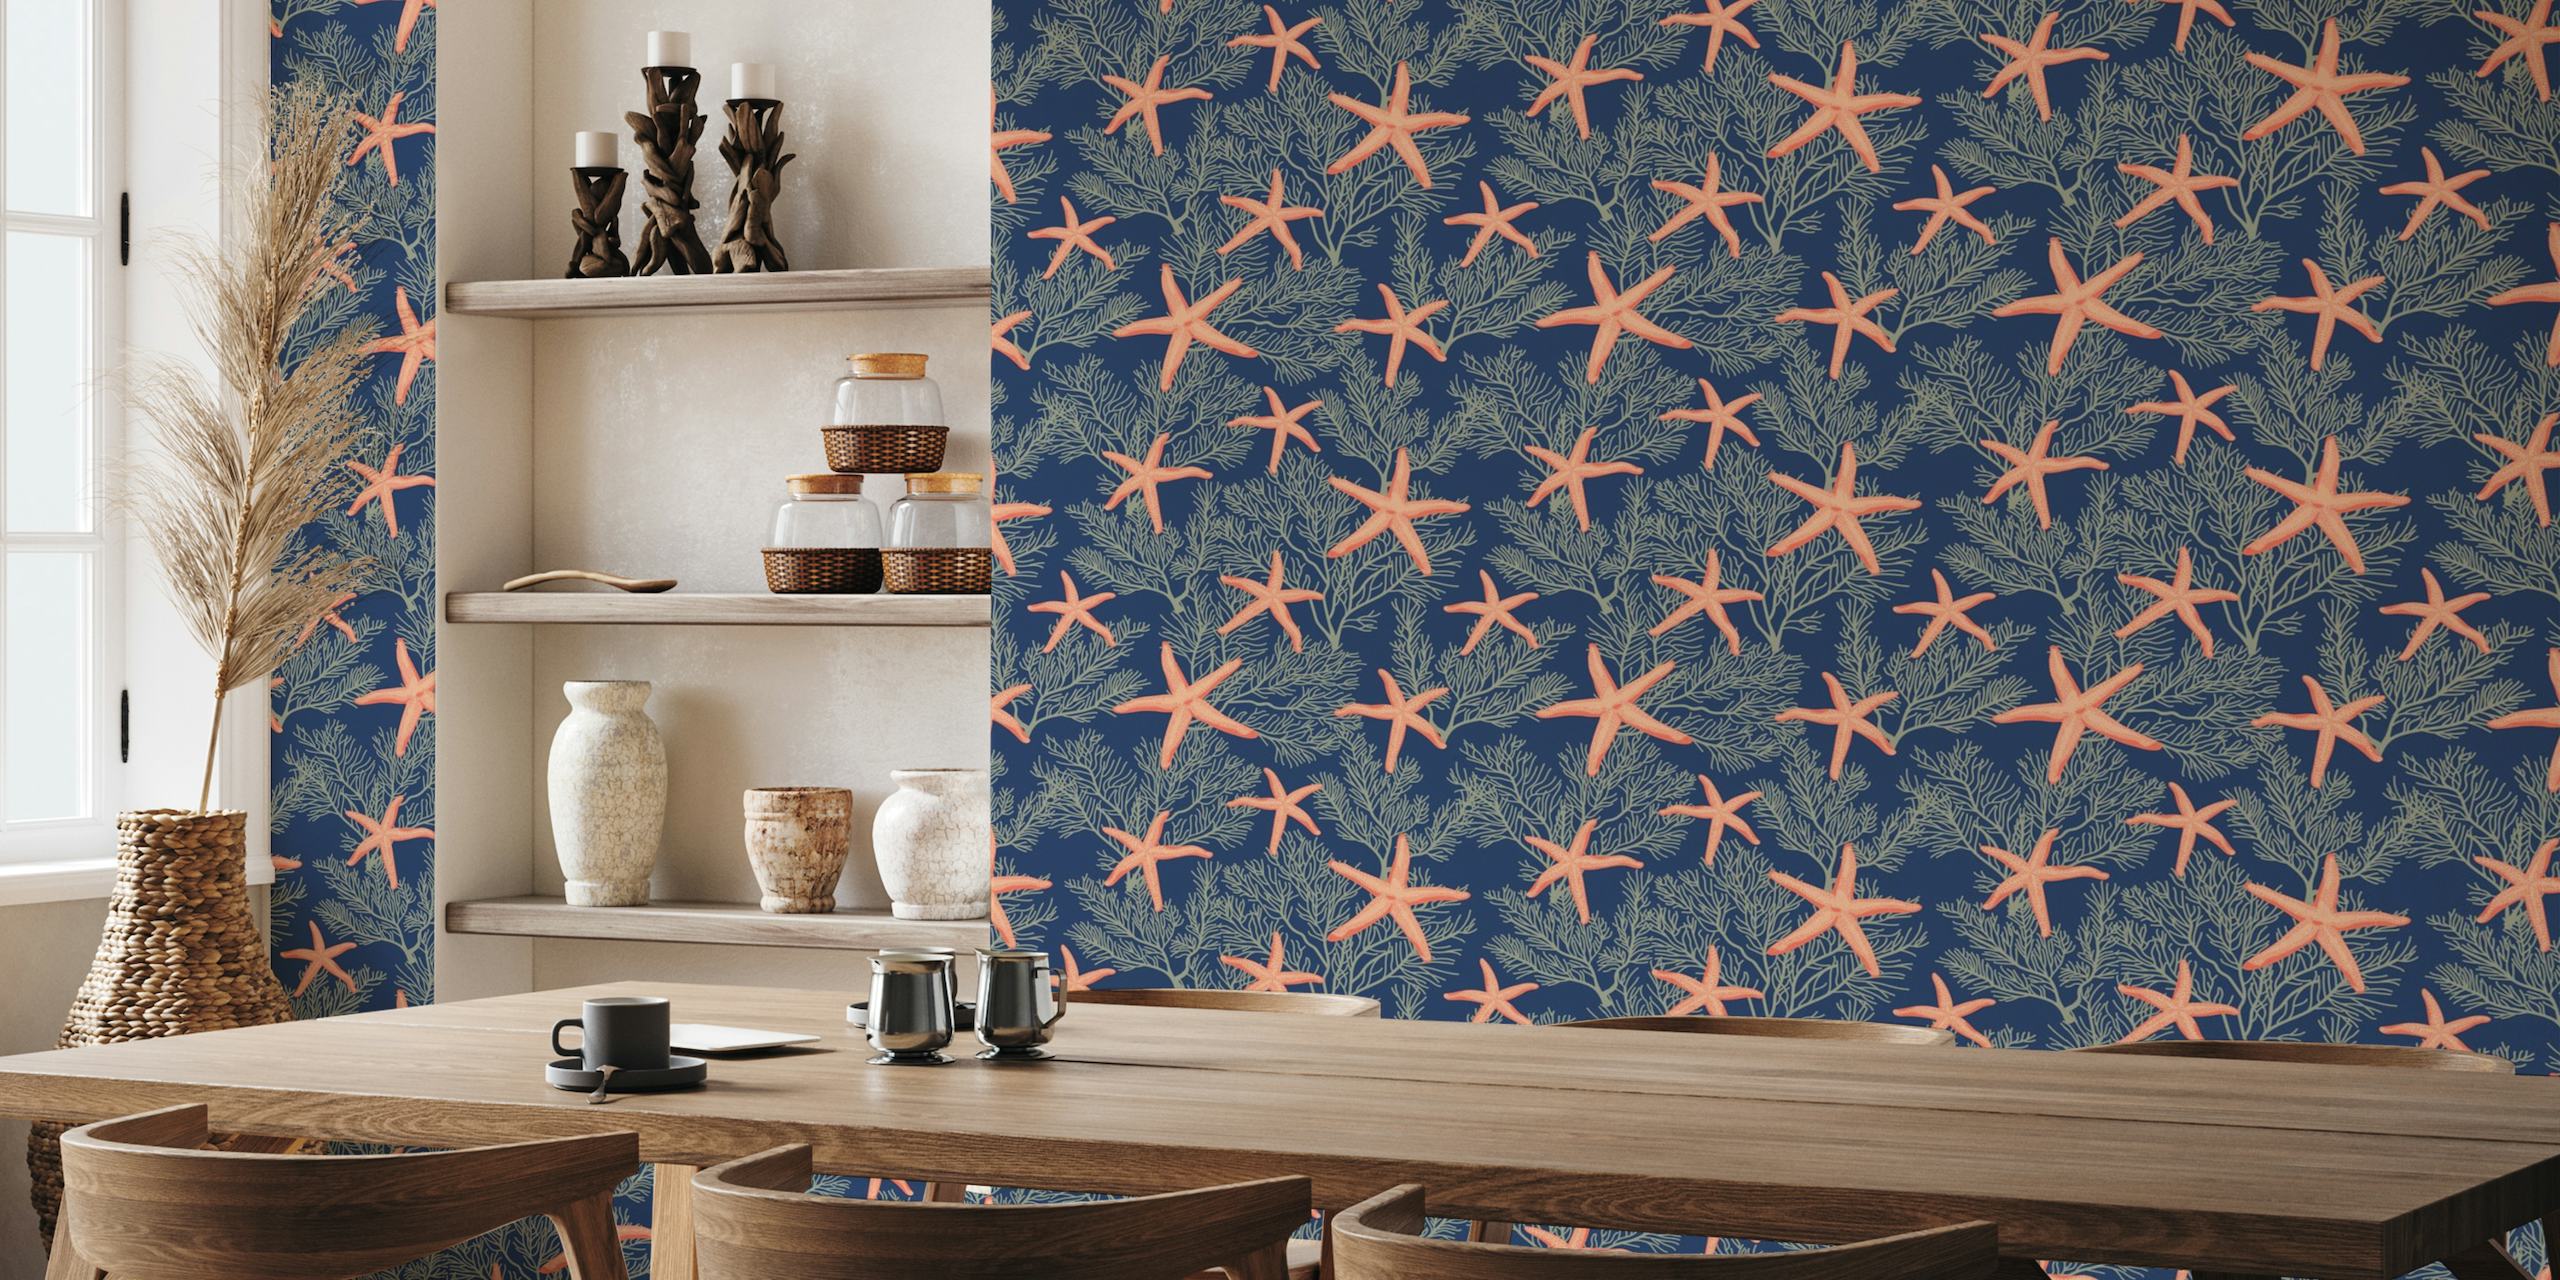 Starfishes on blue classic navy behang